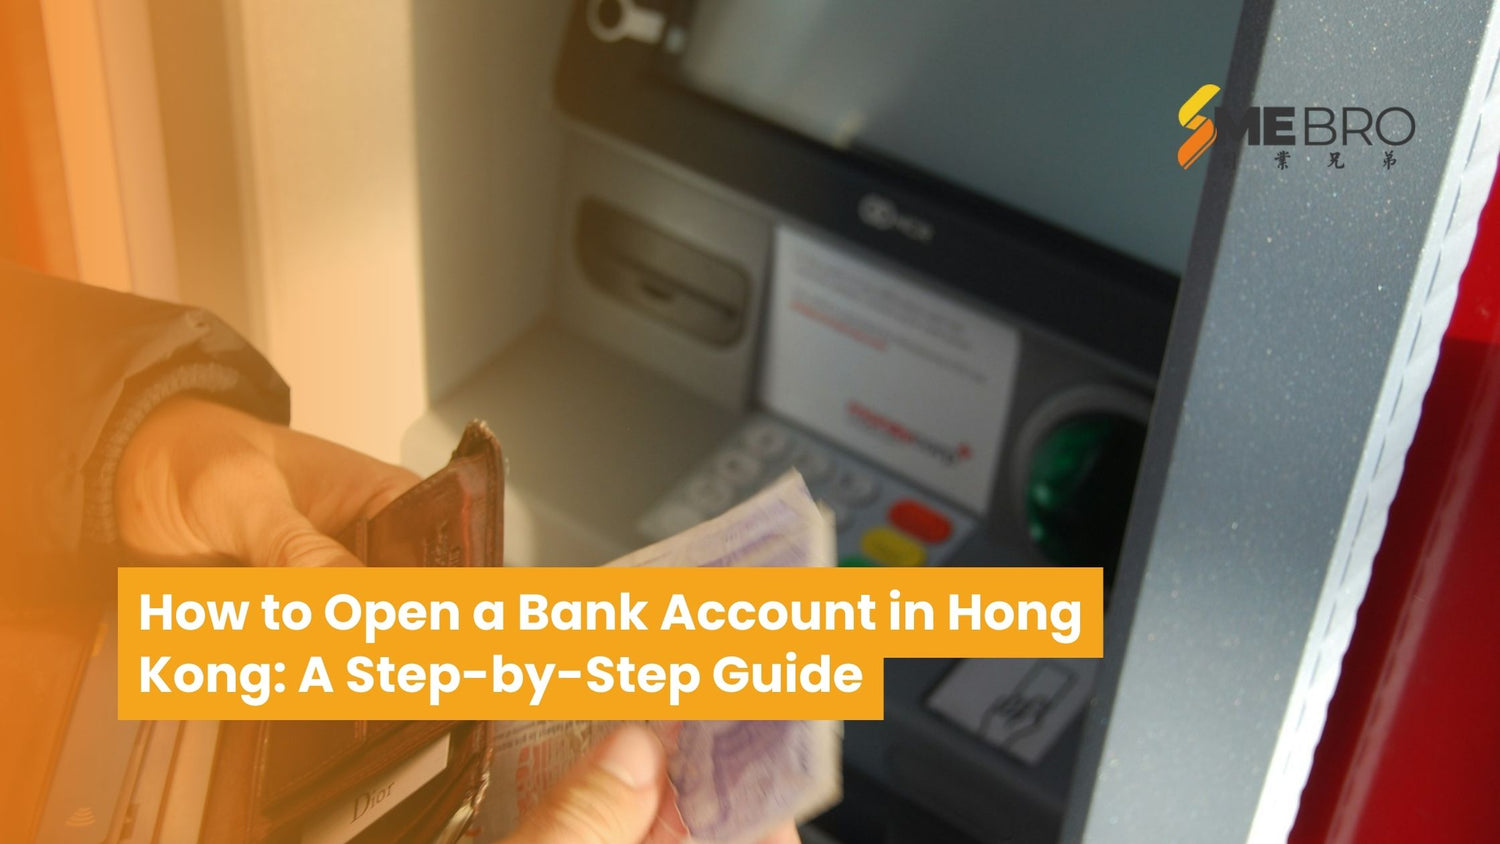 How to Open a Bank Account in Hong Kong: A Step-by-Step Guide